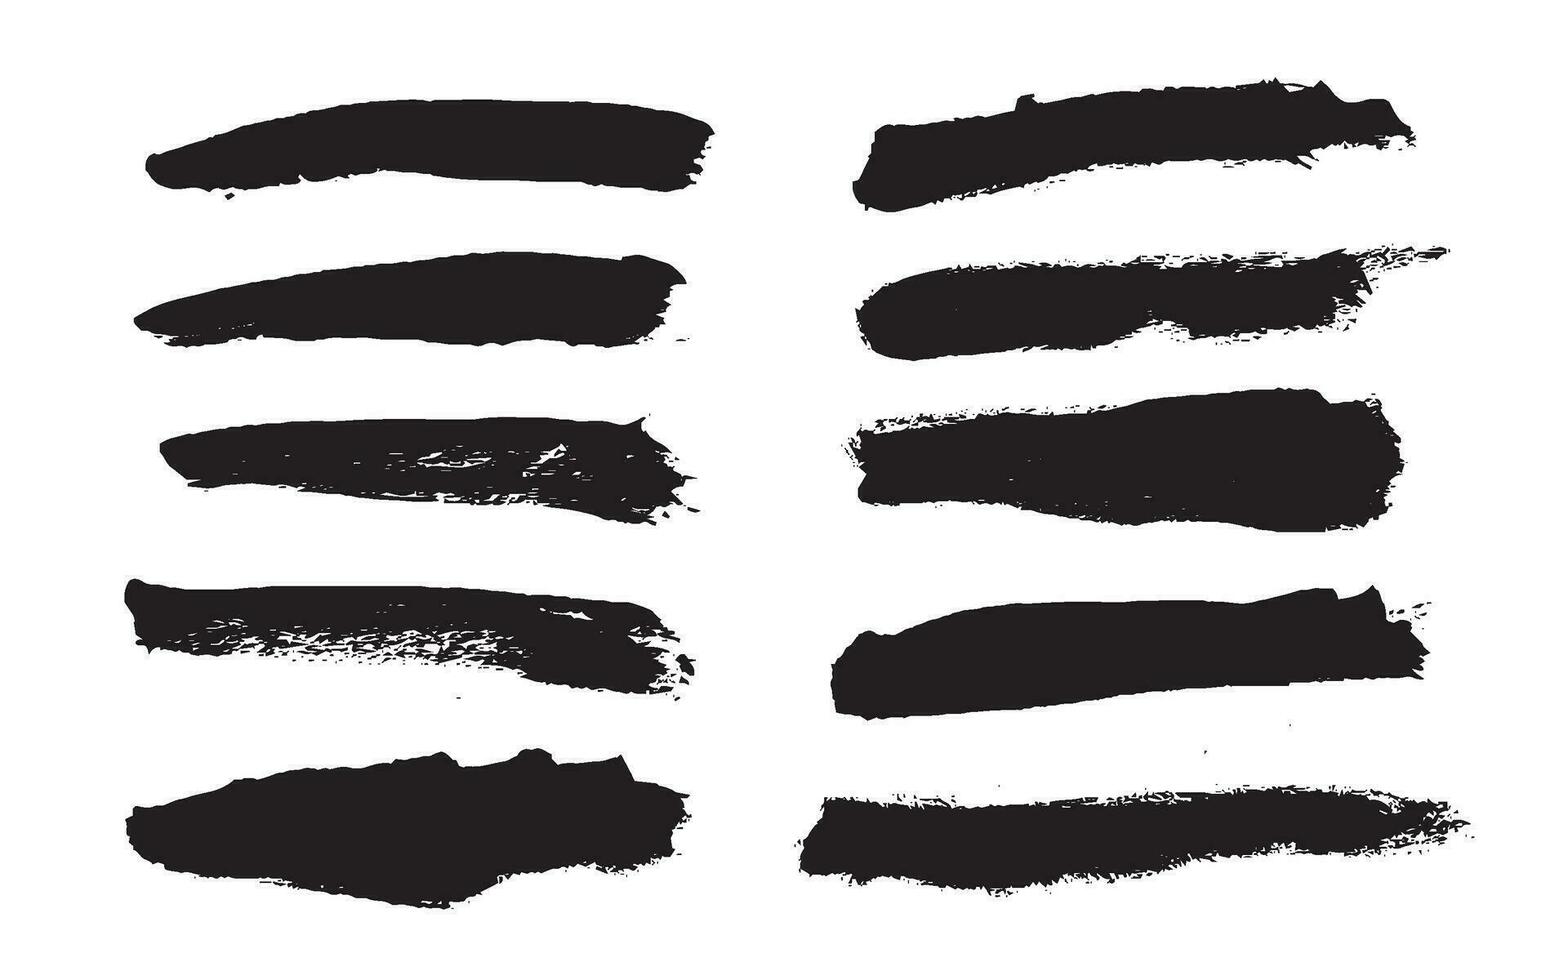 Black paint brush strokes isolated on white background. Paintbrush set template. Grunge texture effect. Graphic design elements grungy painted style concept for banner, flyer, cover, brochure, etc vector